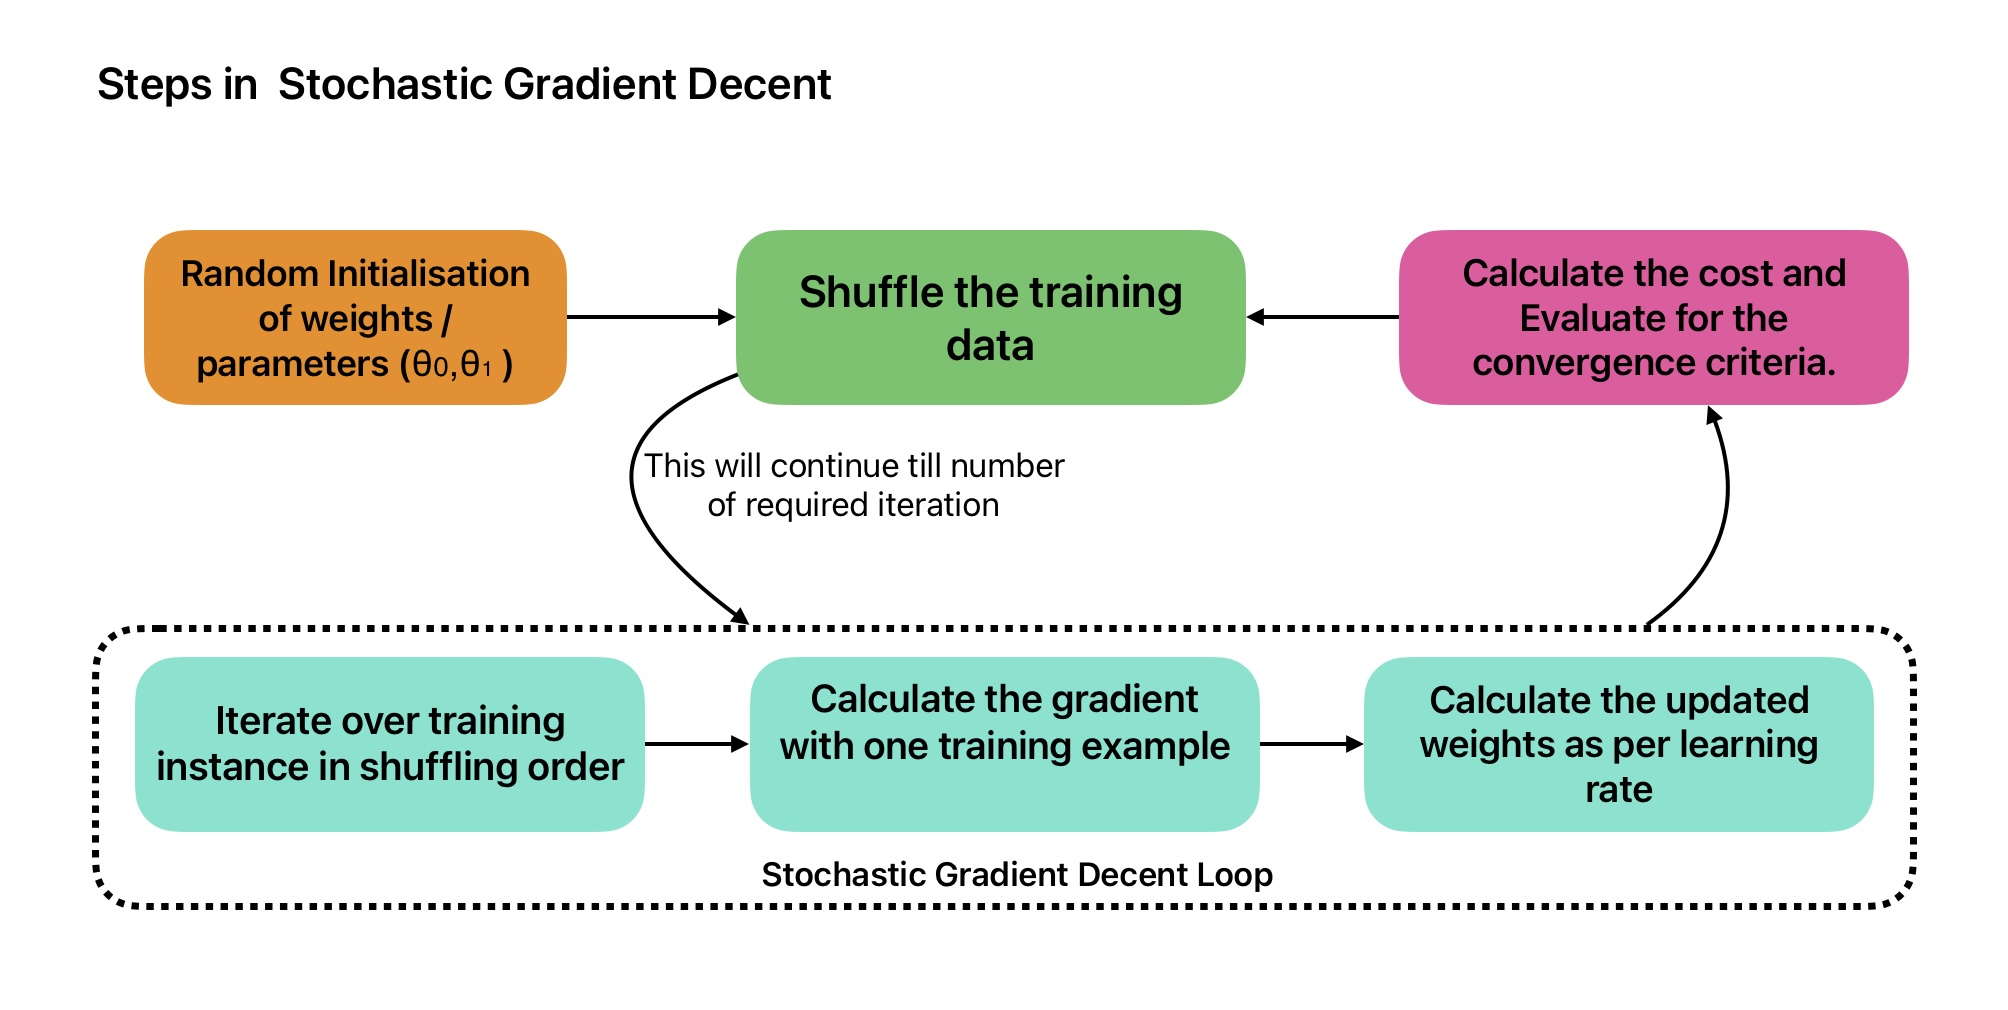 This image shows the Steps in stochastic gradient descent algorithm.